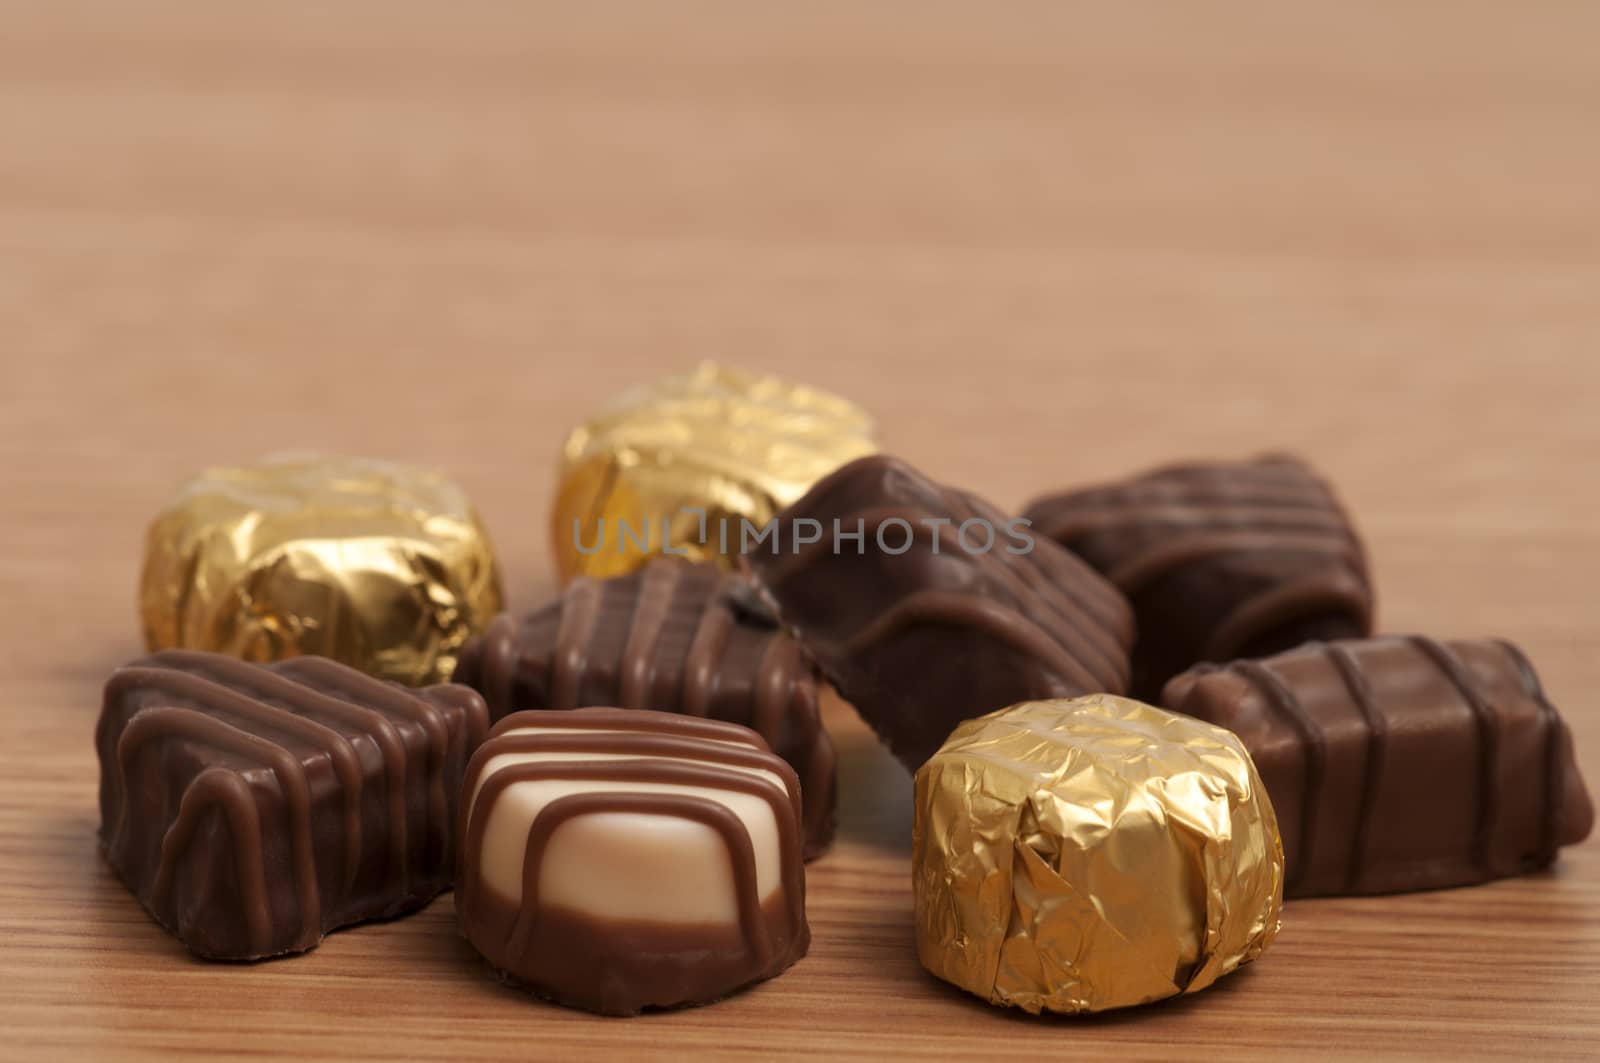 Small selection of chocolate on the table